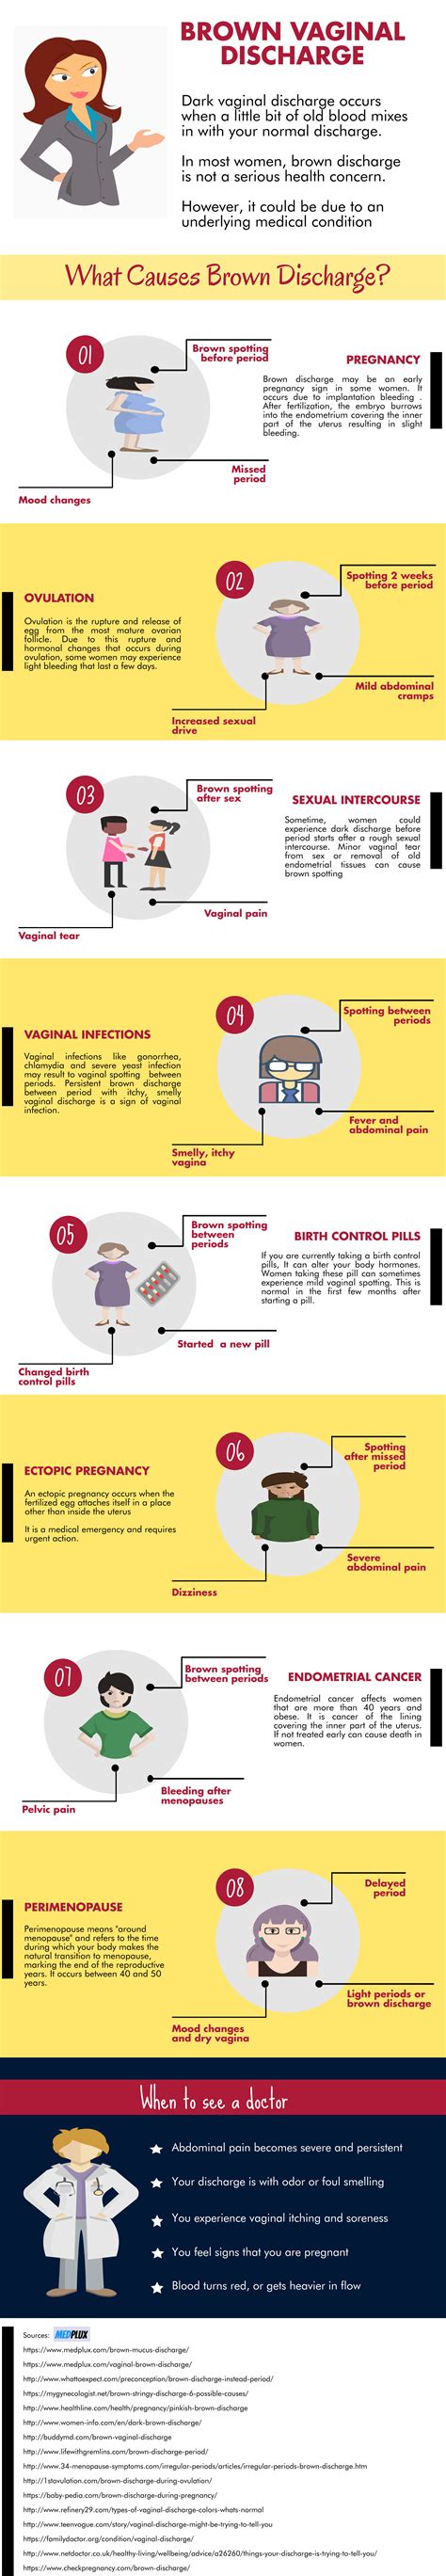 Vaginal Brown Discharge Causes And Concerns Infographic